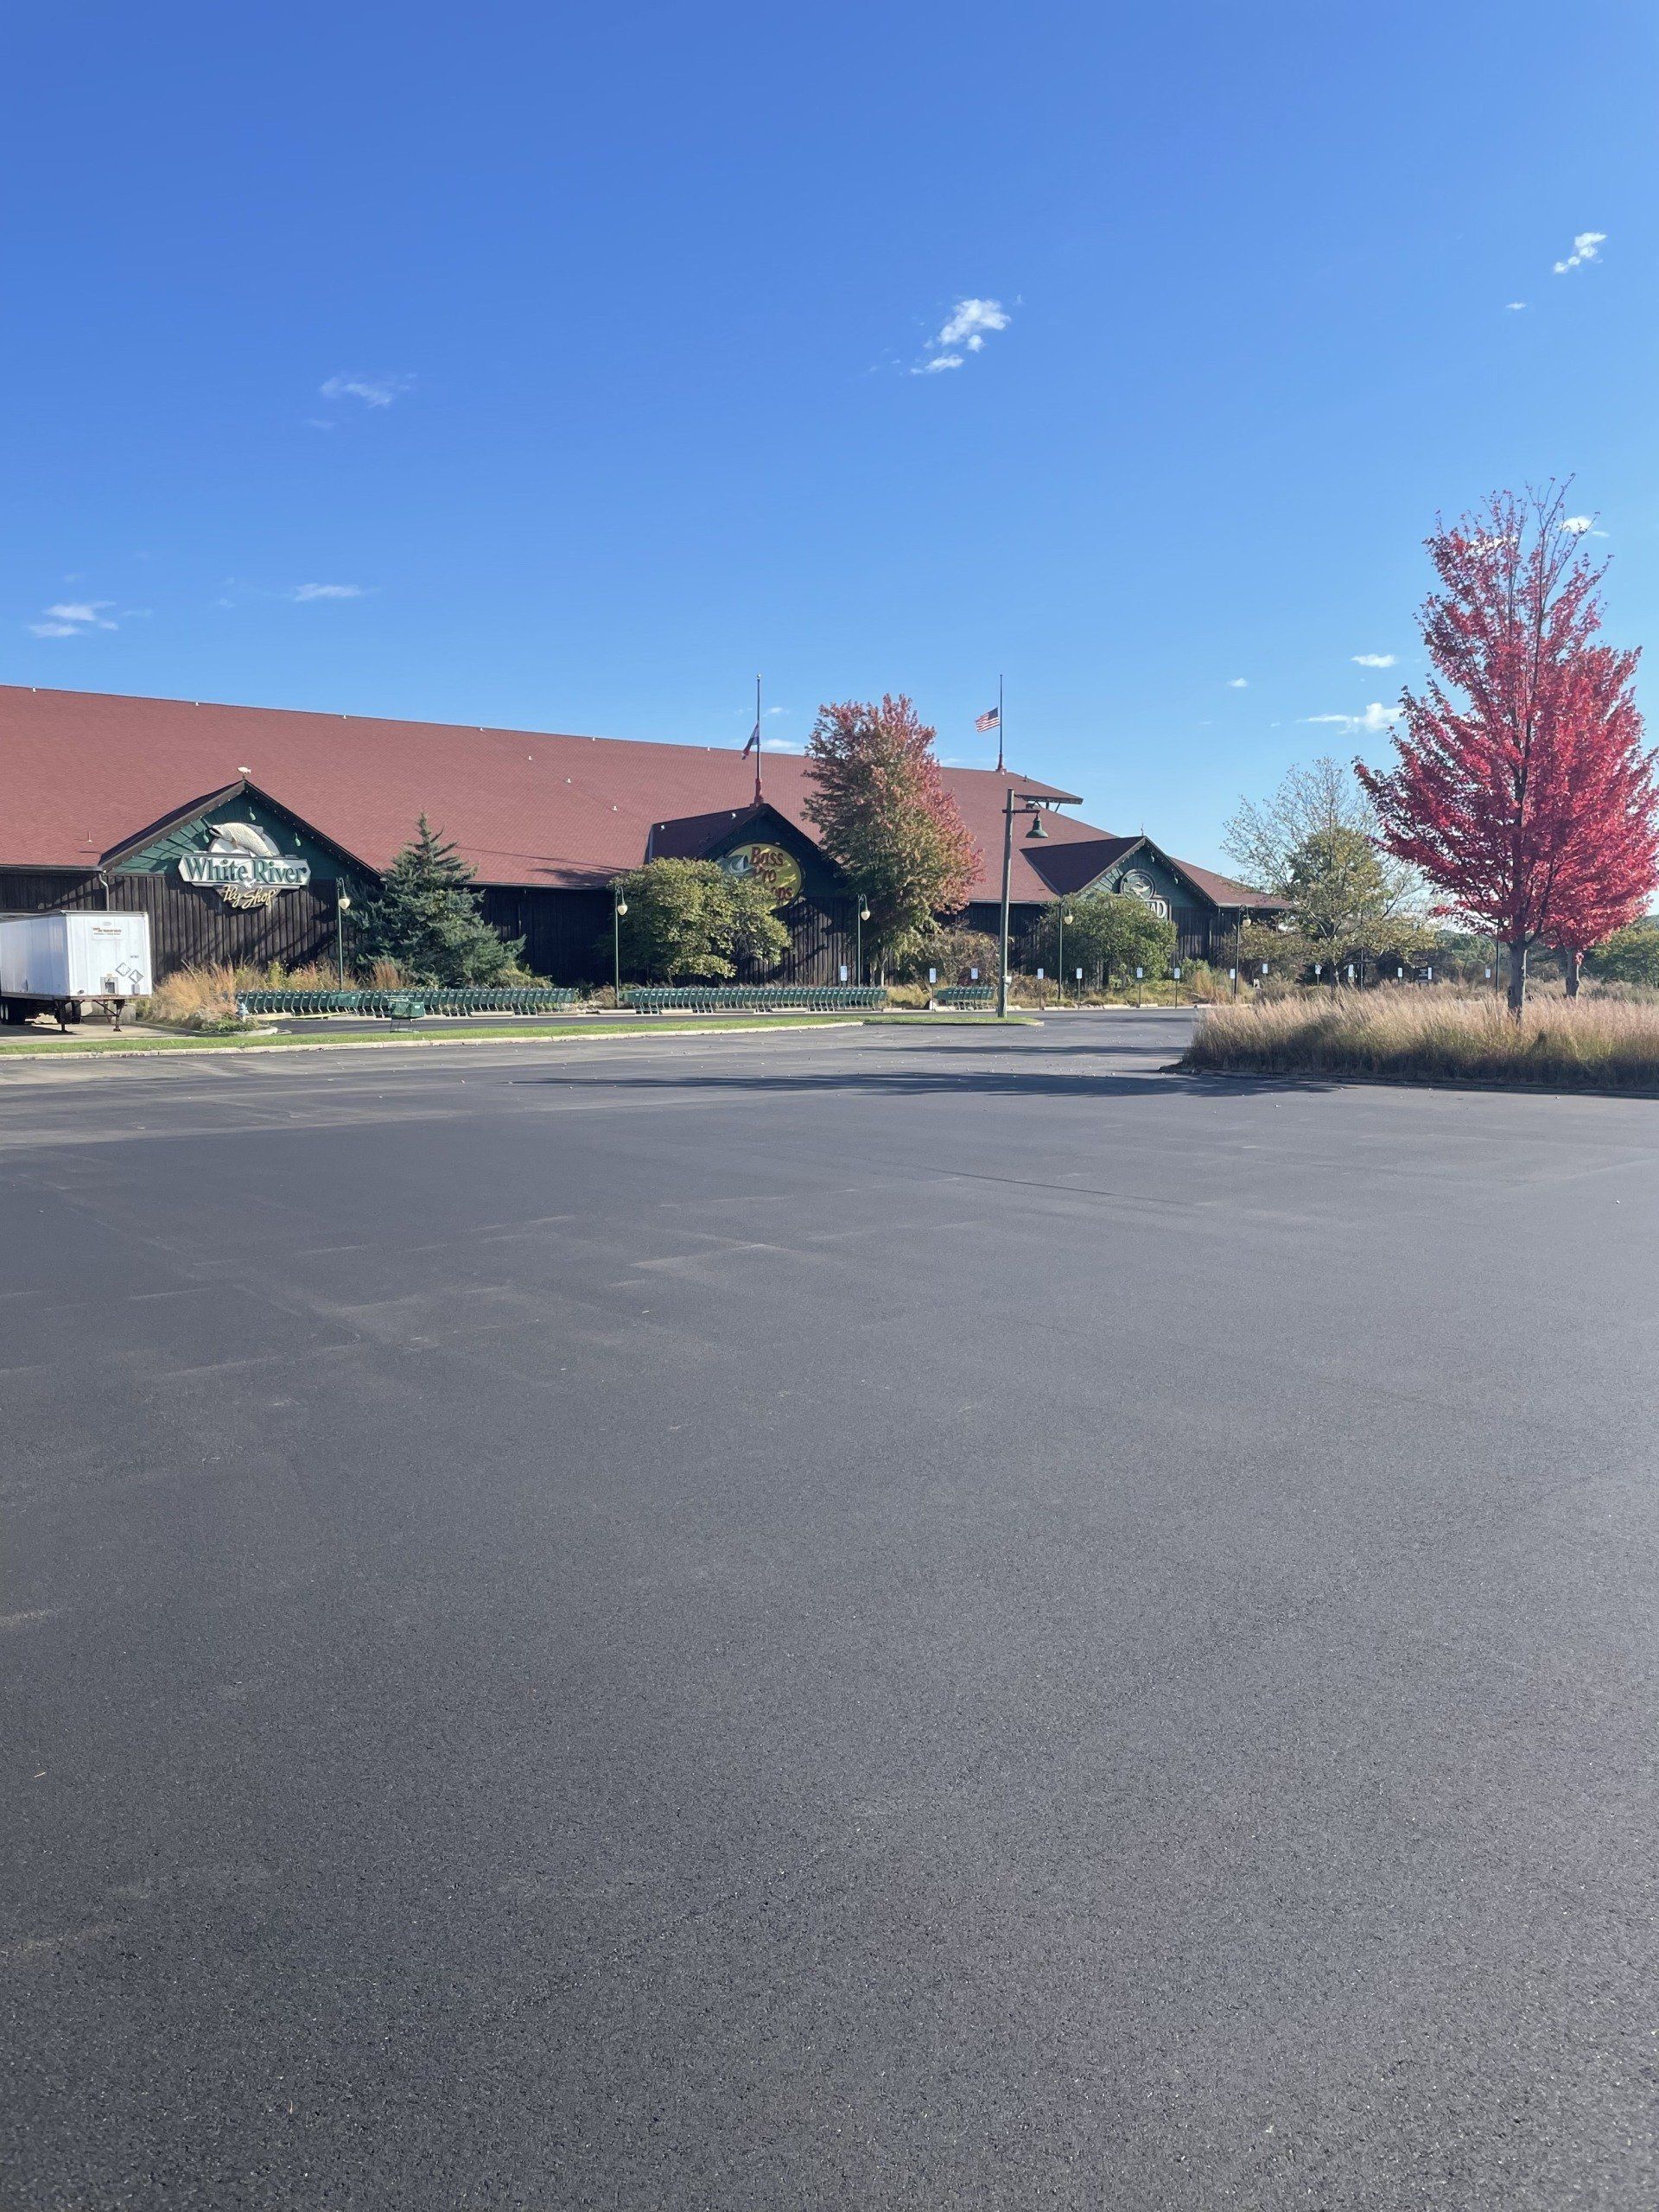 MoSEAL's Asphalt Is Often Used to Pave Many Commercial Lots in Boonville, MO.